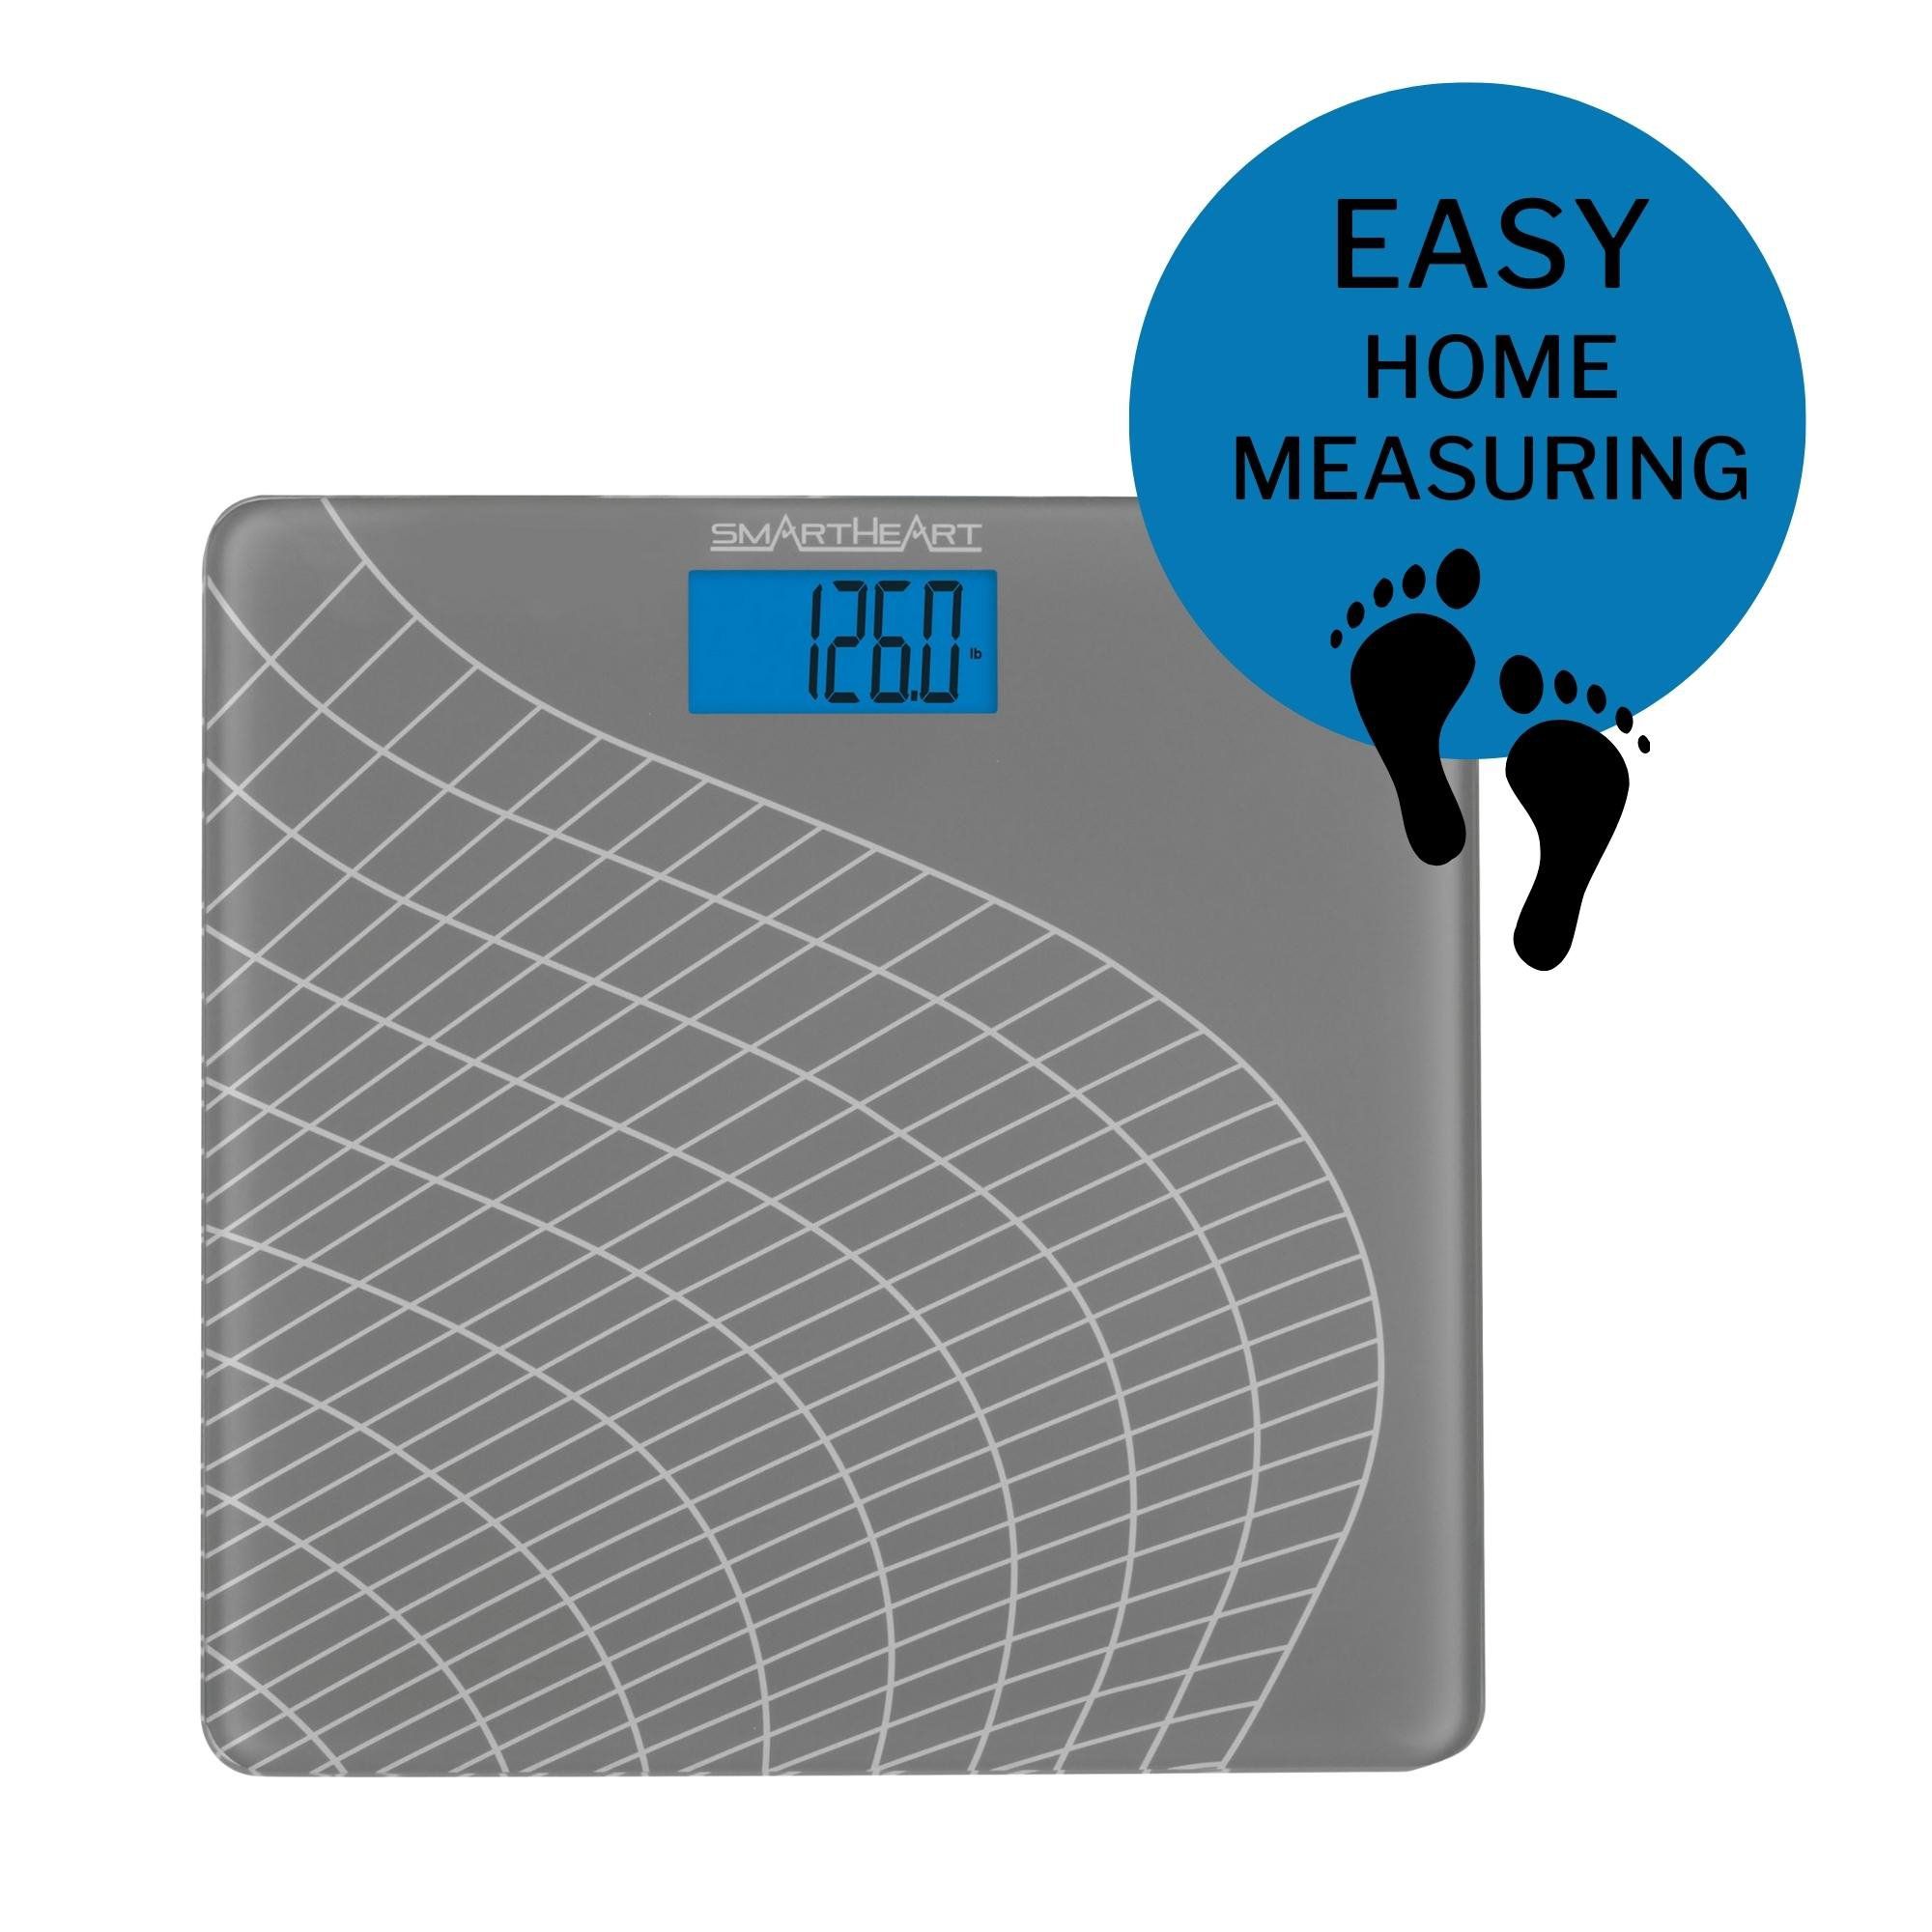 Smartheart Talking Digital Scale | Audible Results in English or Spanish - 438 lbs Weight Capacity